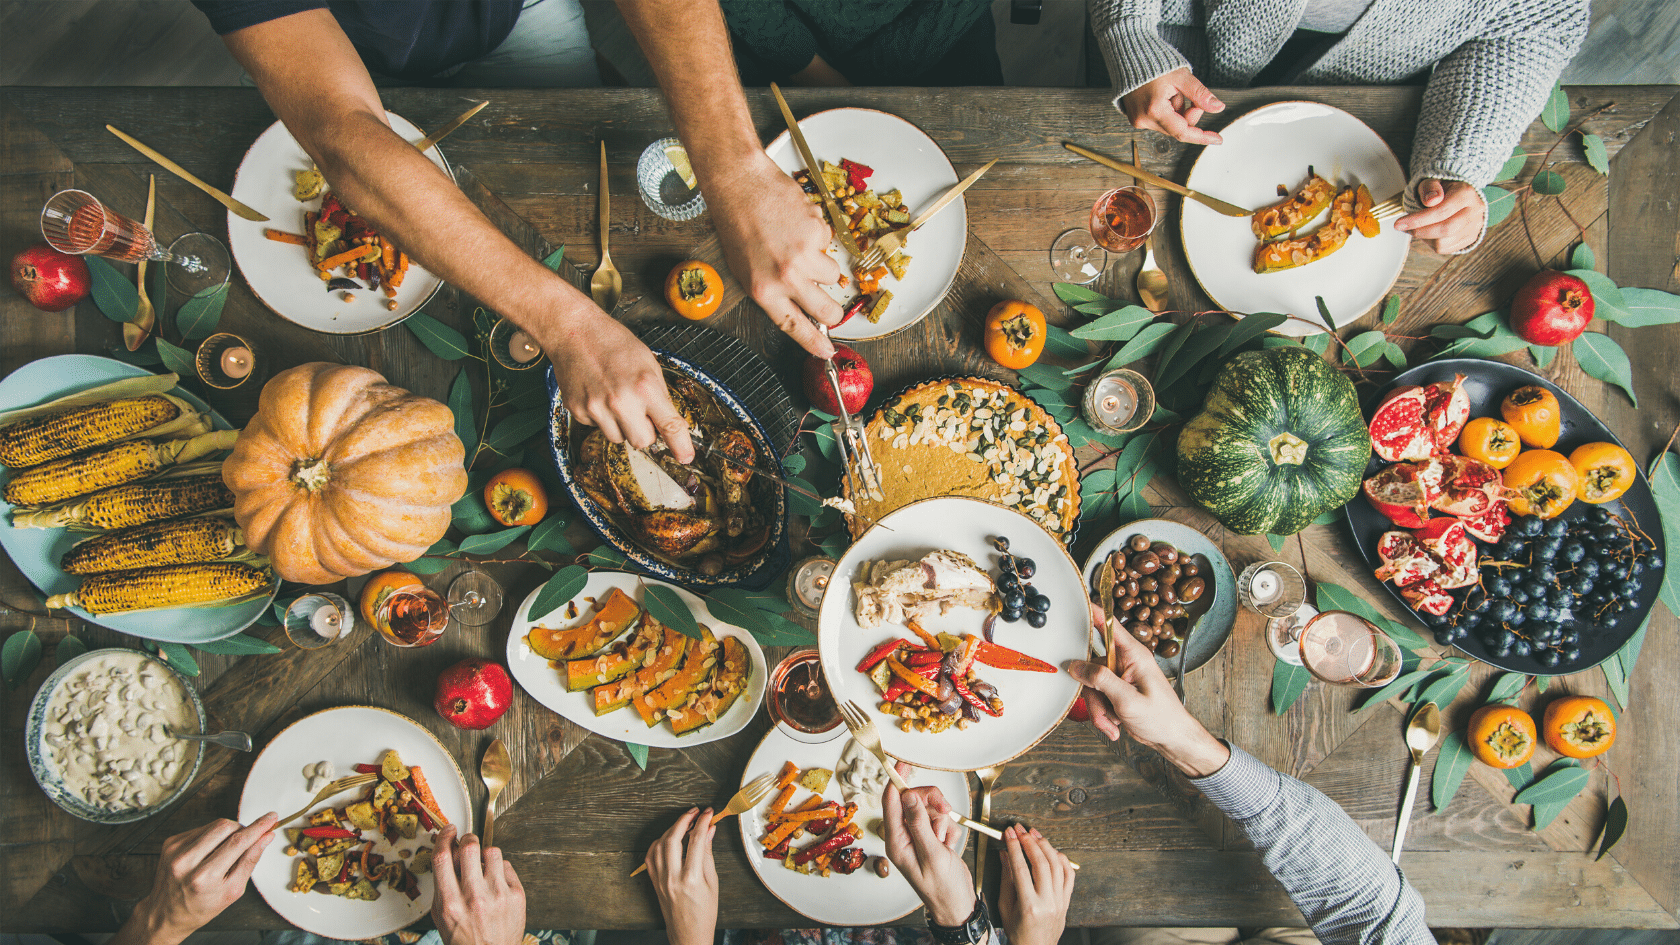 Canadian Thanksgiving Traditions are Shifting